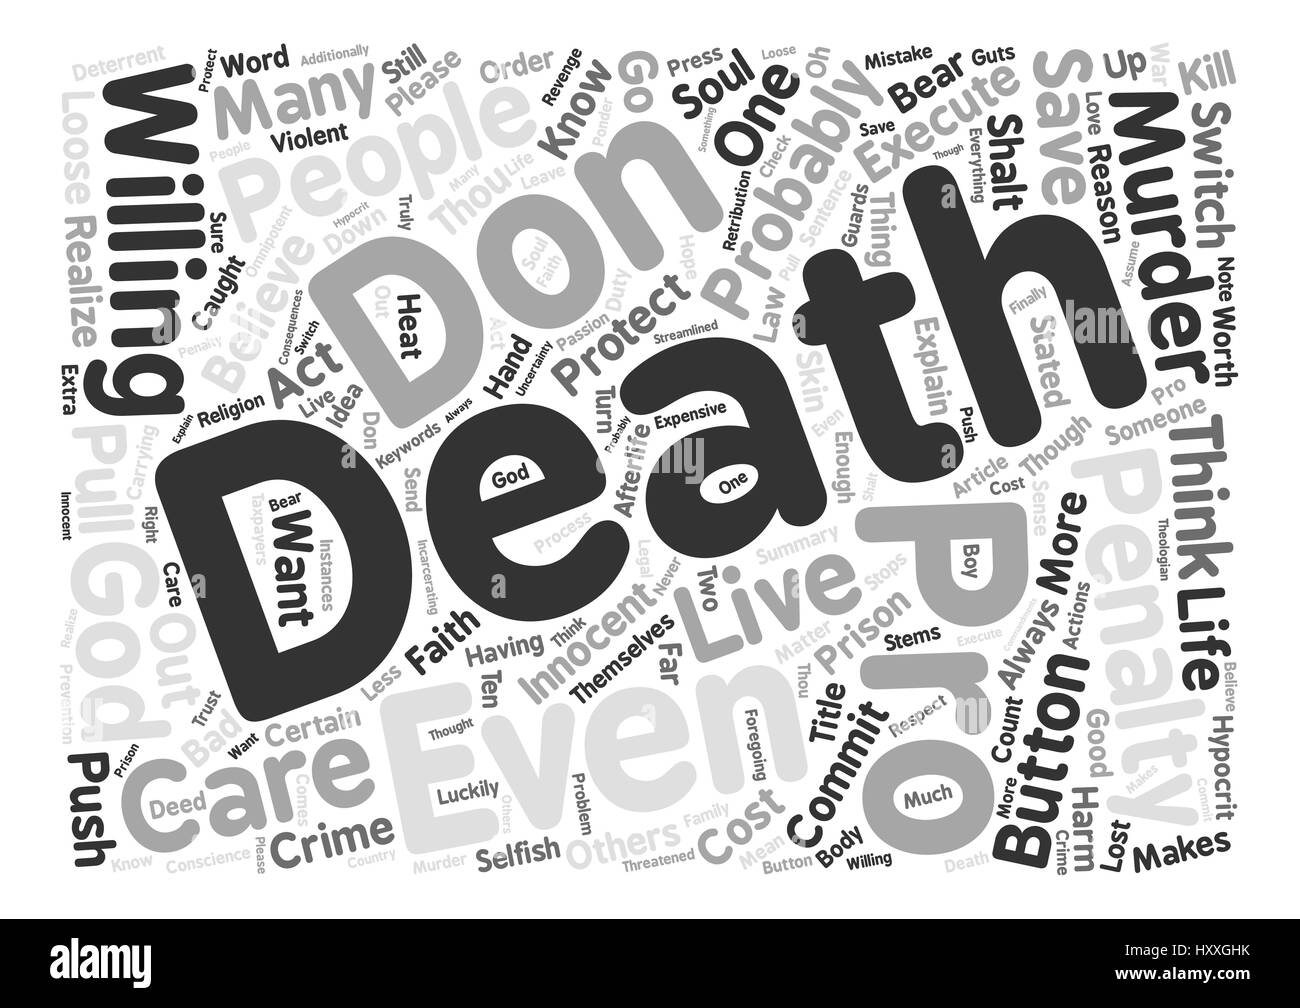 The Death Penalty Is It Good Or Bad Word Cloud Concept Text Stock